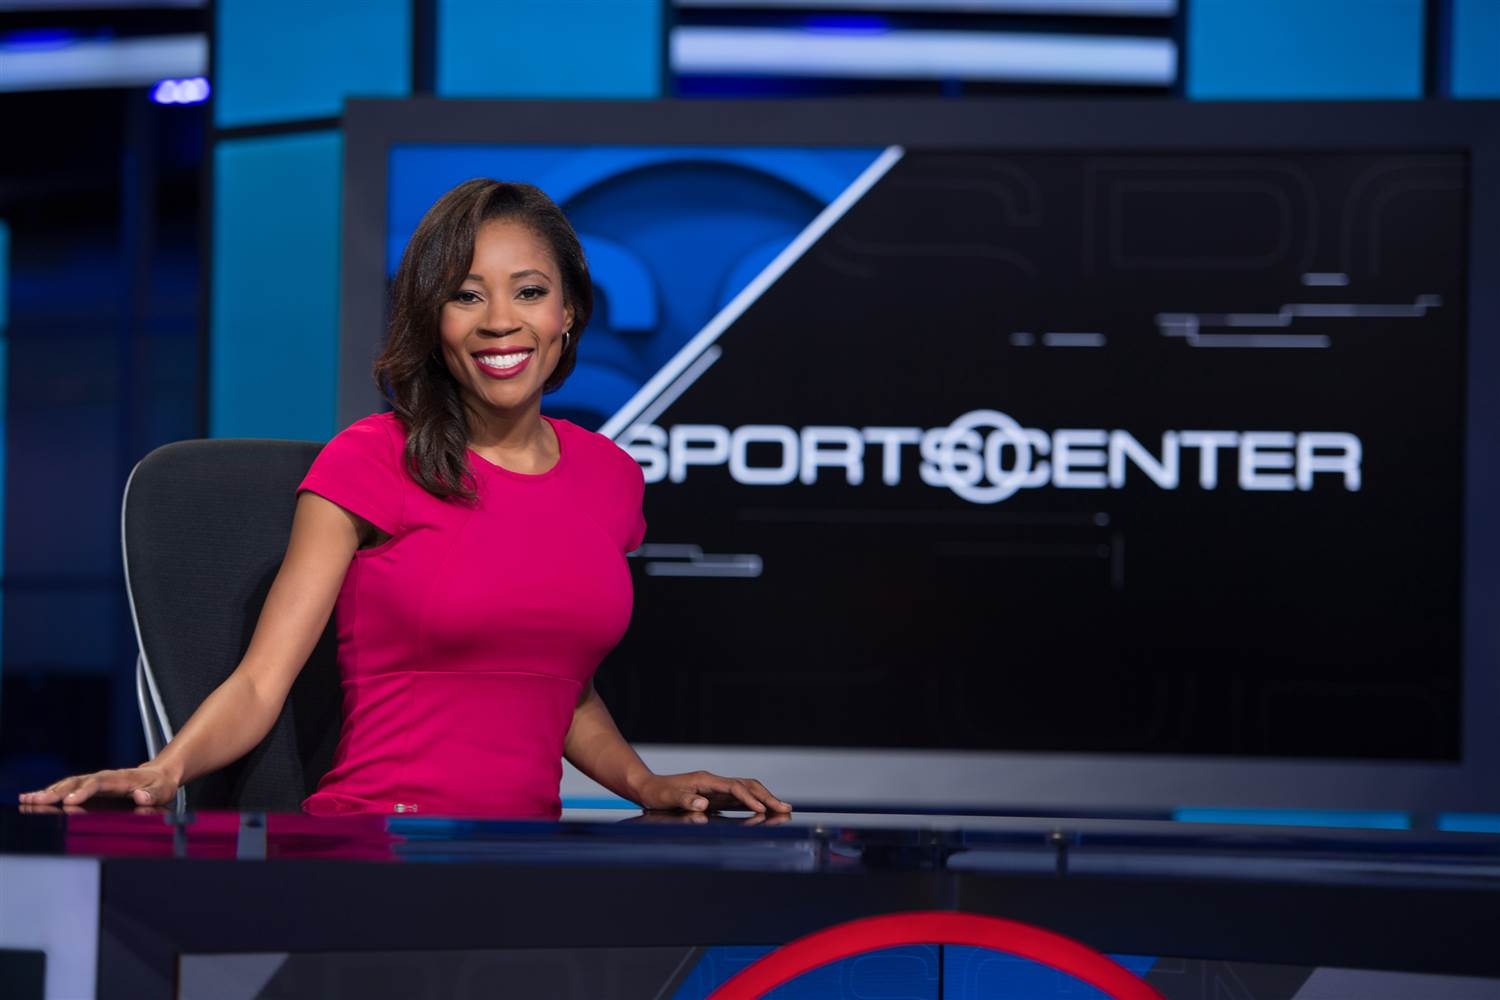 Ex-ESPN host sues network, claims it is ‘rife with misogyny’